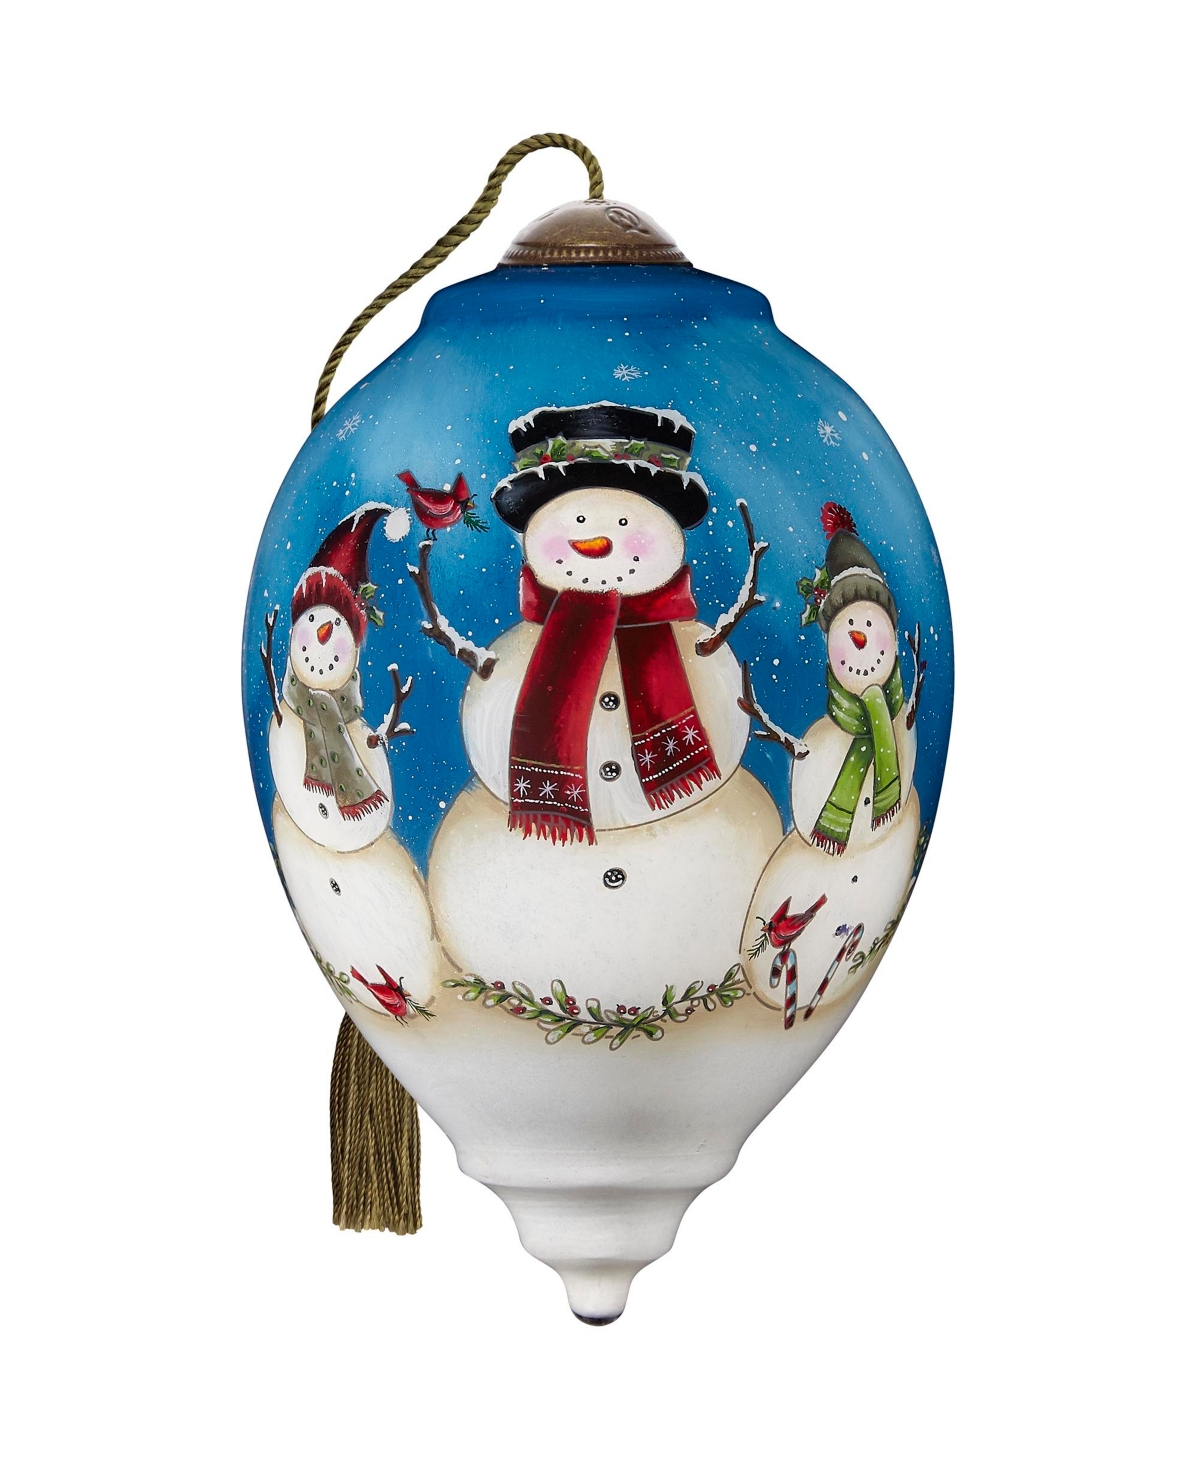 Precious Moments Ne'qwa Art 7221112 Snowflakes, Friendship, And Winter Cheer Hand-painted Blown Glass Ornament In Multicolor